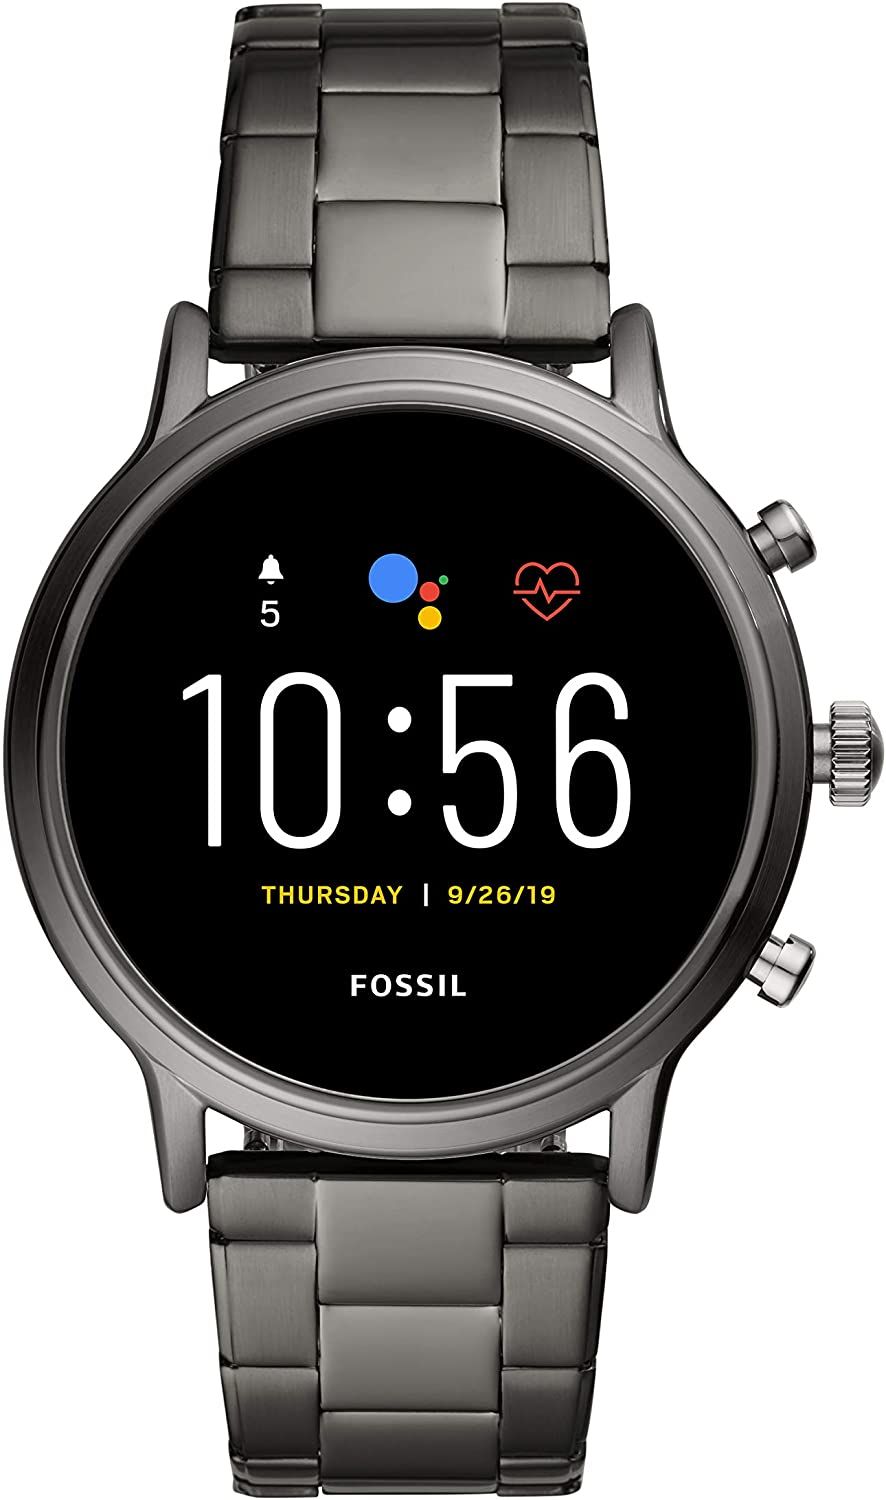 Fossil Gen 5 Carlyle Stainless Steel Touchscreen Smartwatch a